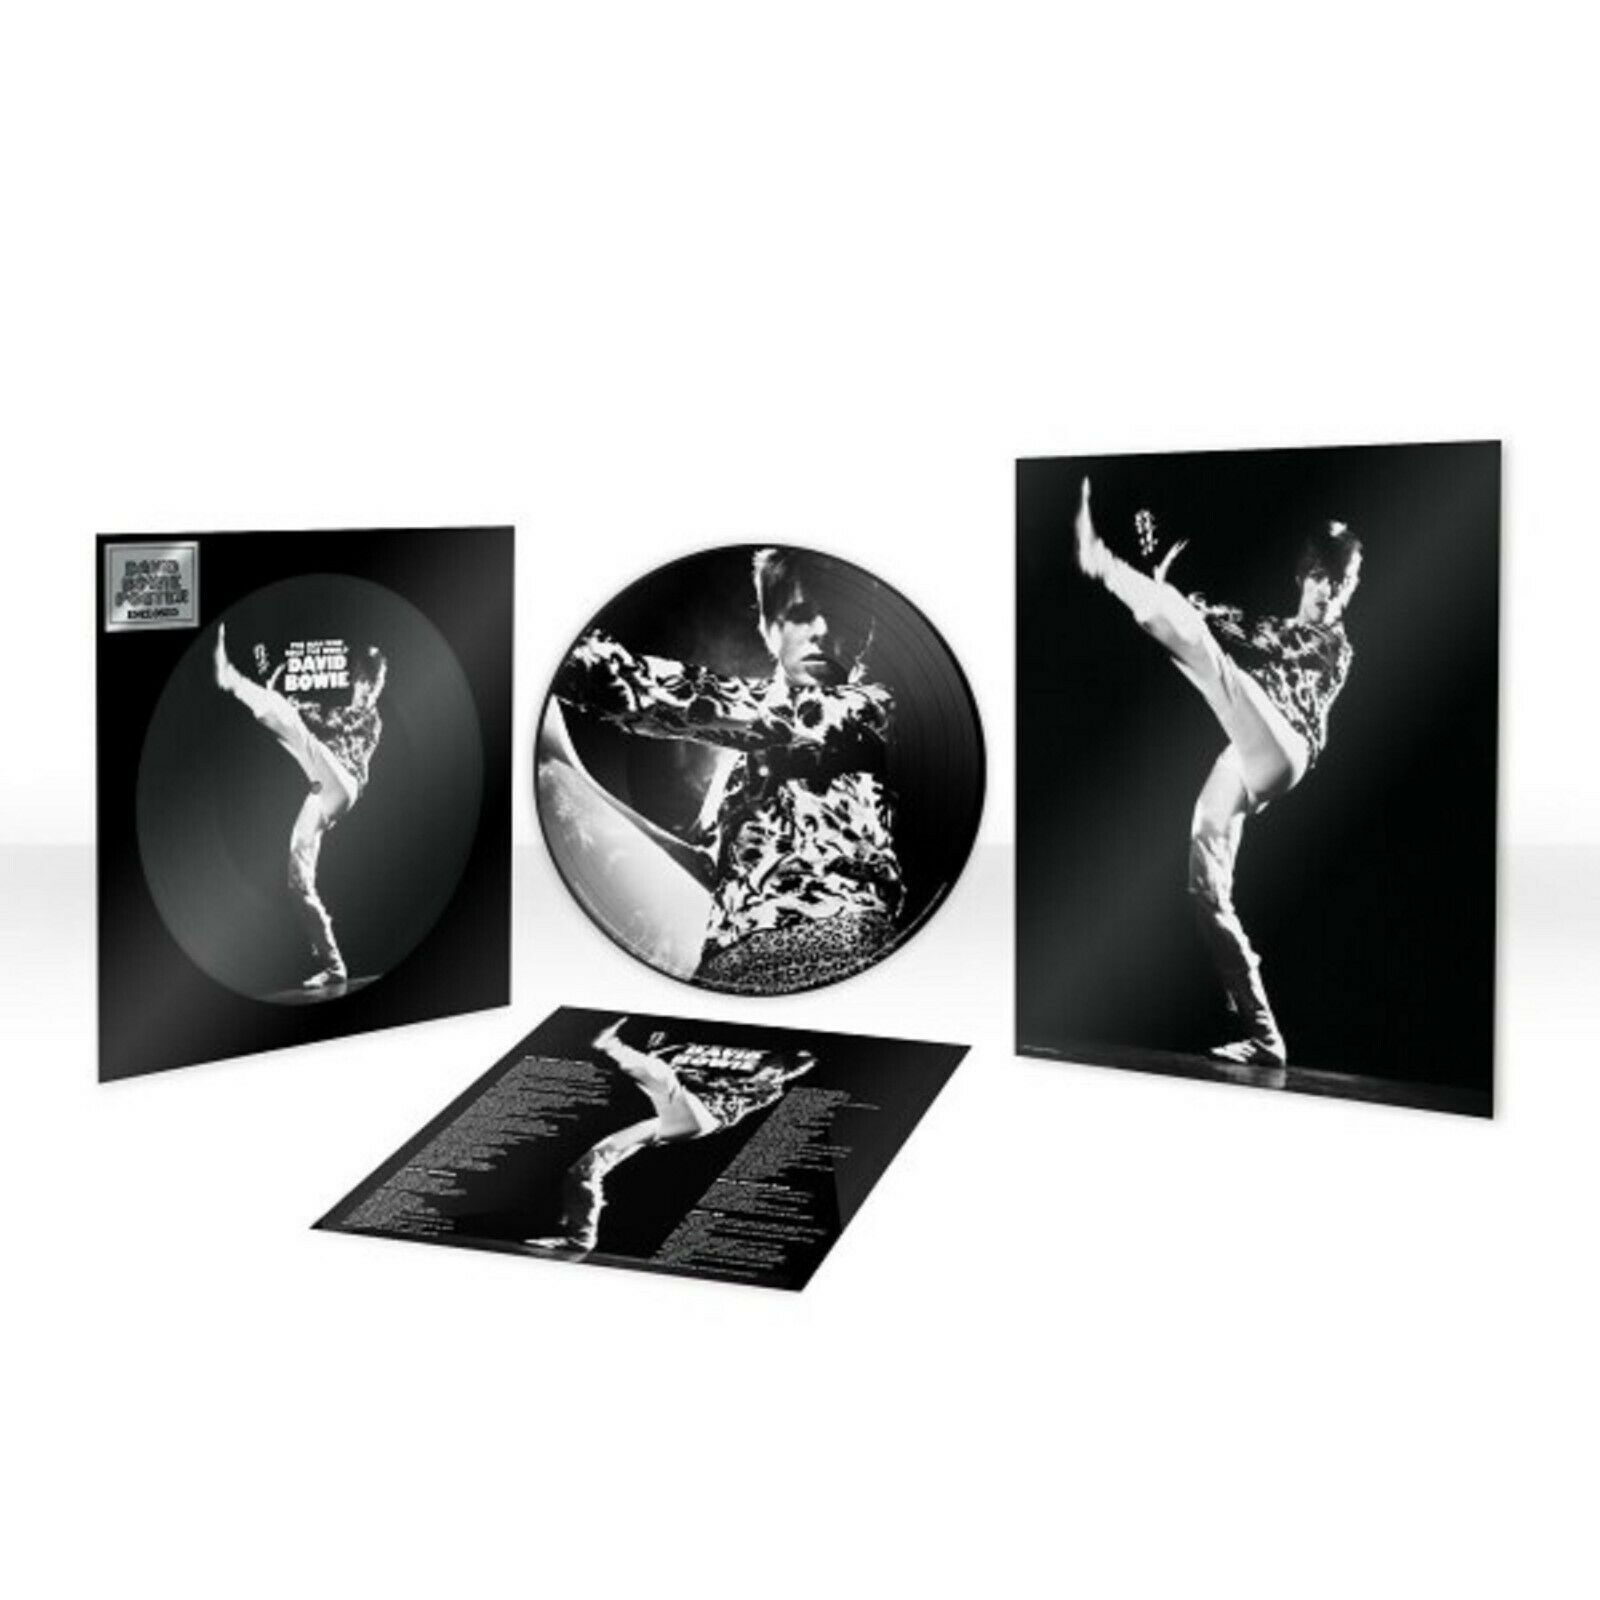 DAVID BOWIE, THE MAN WHO SOLD THE WORLD, LTD ED. VINYL PICTURE DISC ...